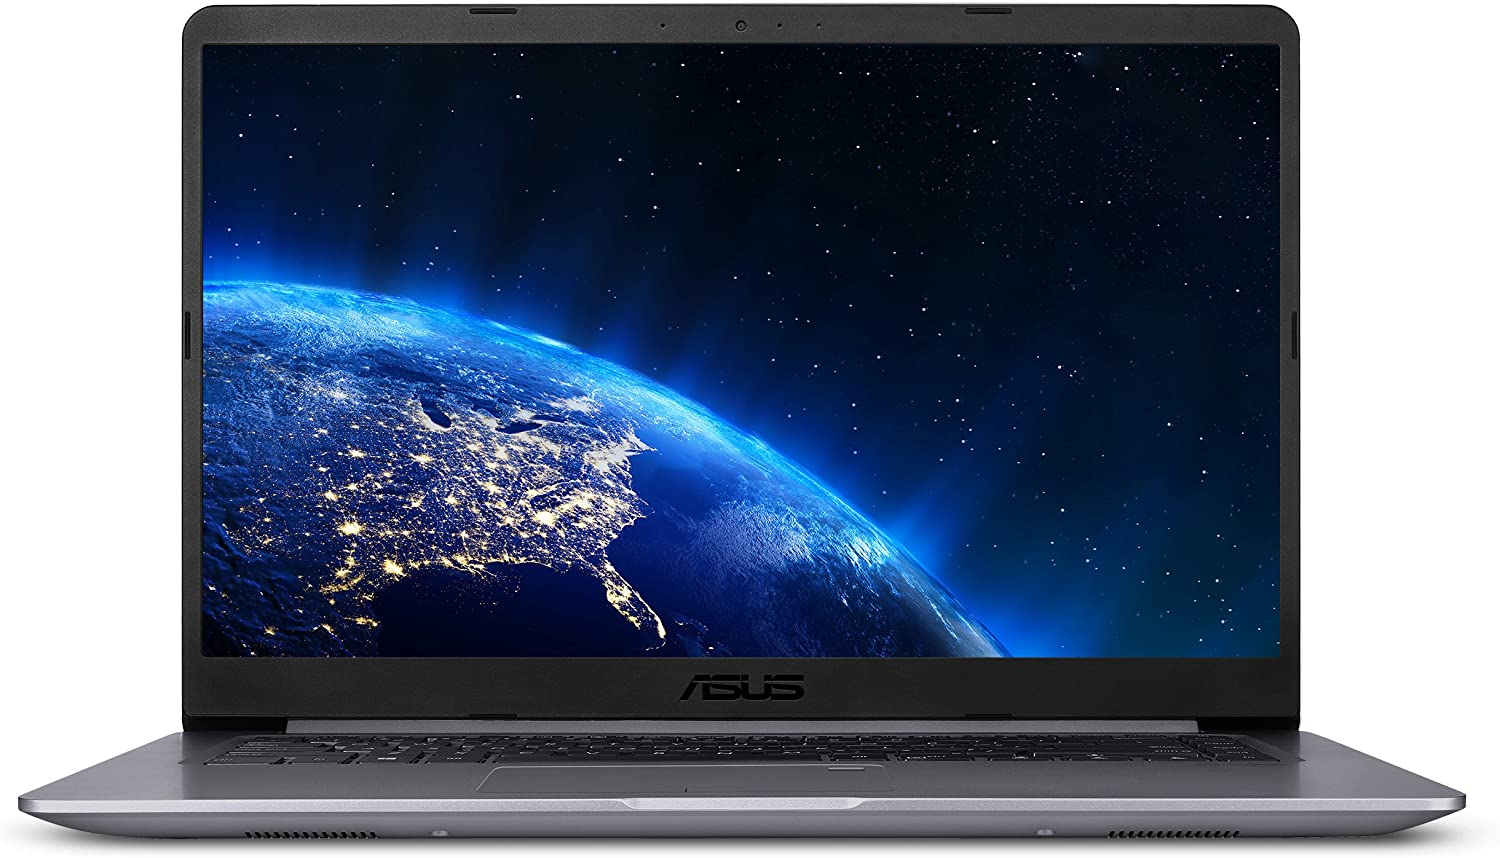 ASUS VivoBook Thin and Lightweight FHD Wide View Laptop